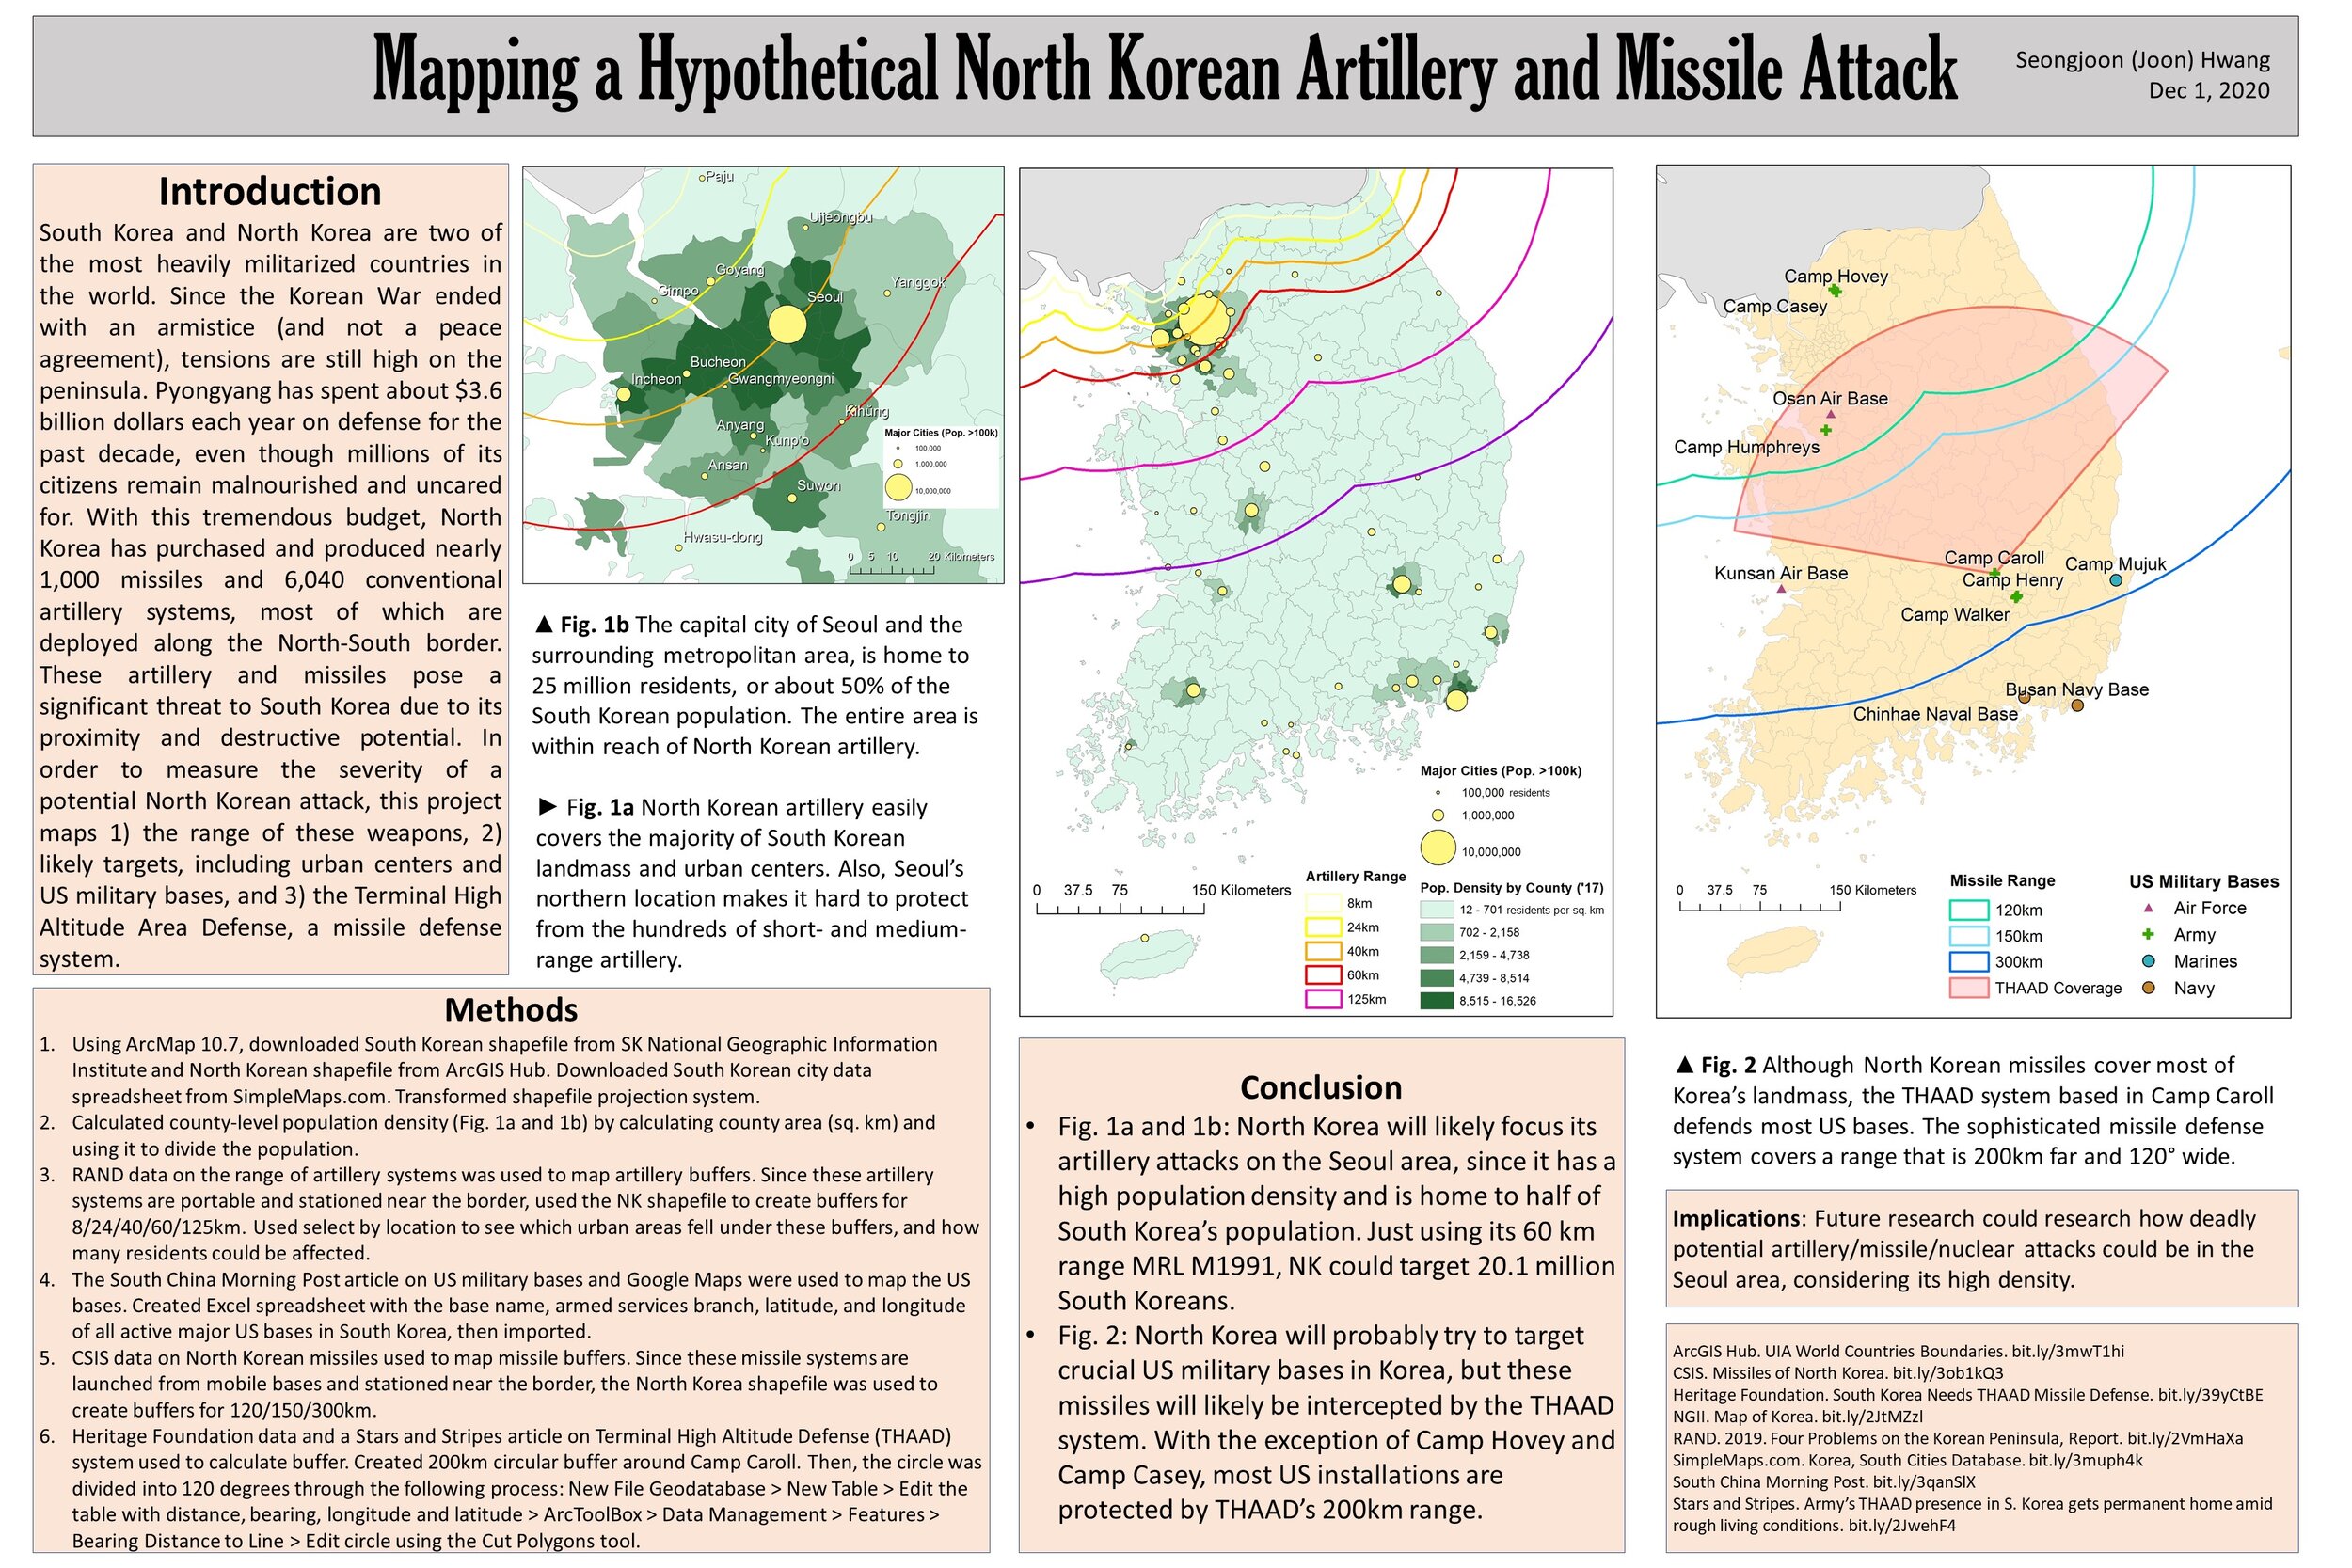 Mapping a Hypothetical North Korean Artillery and Missile Attack